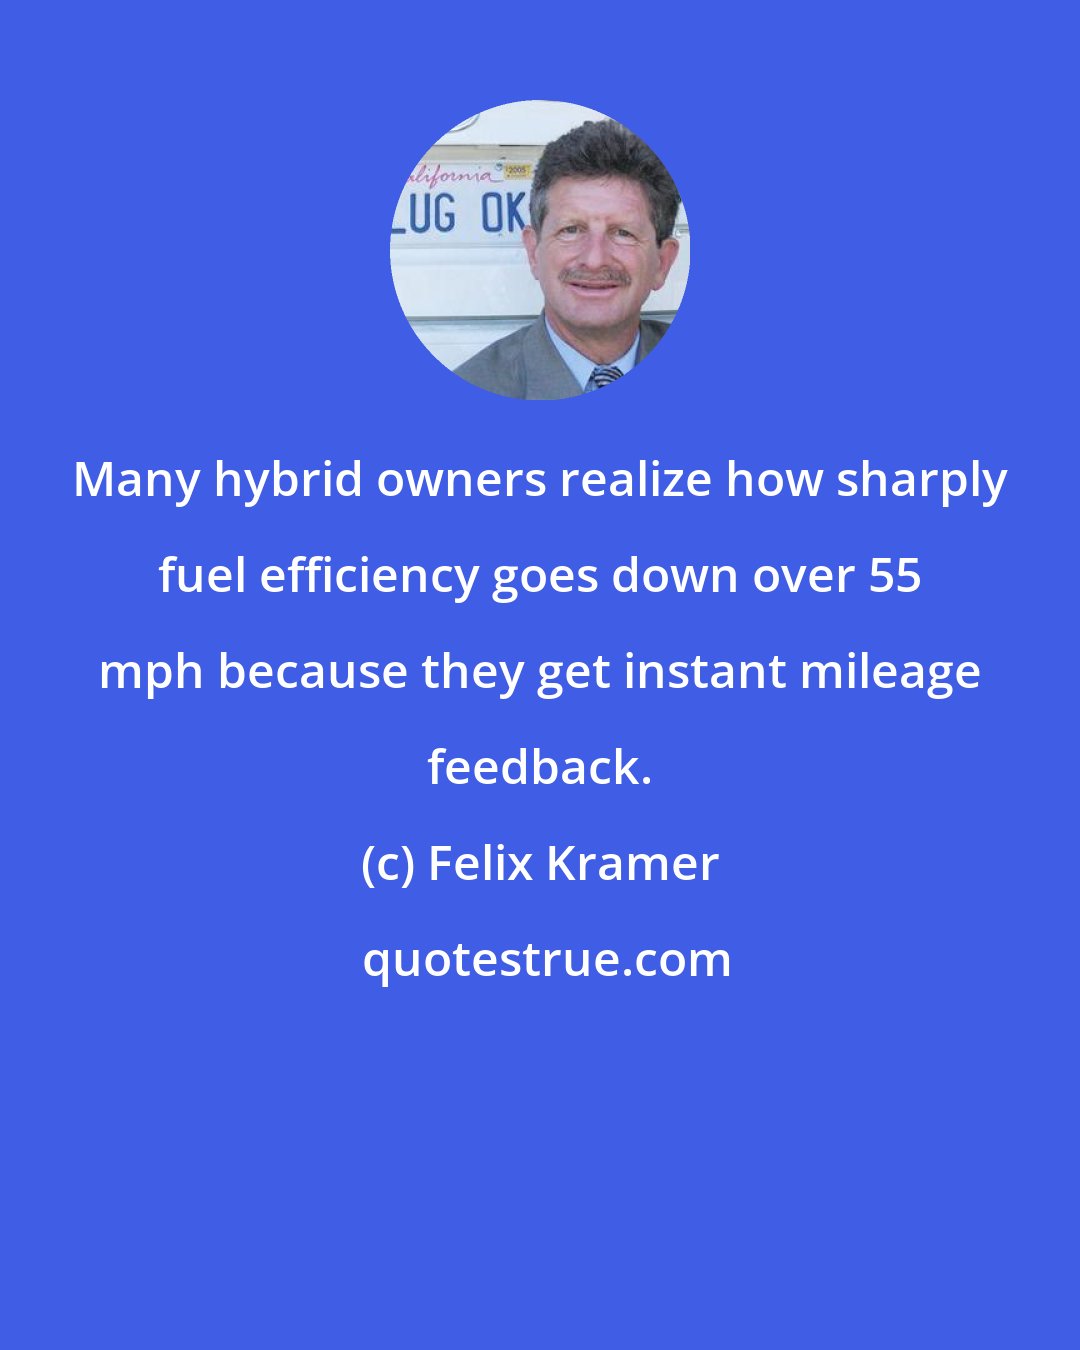 Felix Kramer: Many hybrid owners realize how sharply fuel efficiency goes down over 55 mph because they get instant mileage feedback.